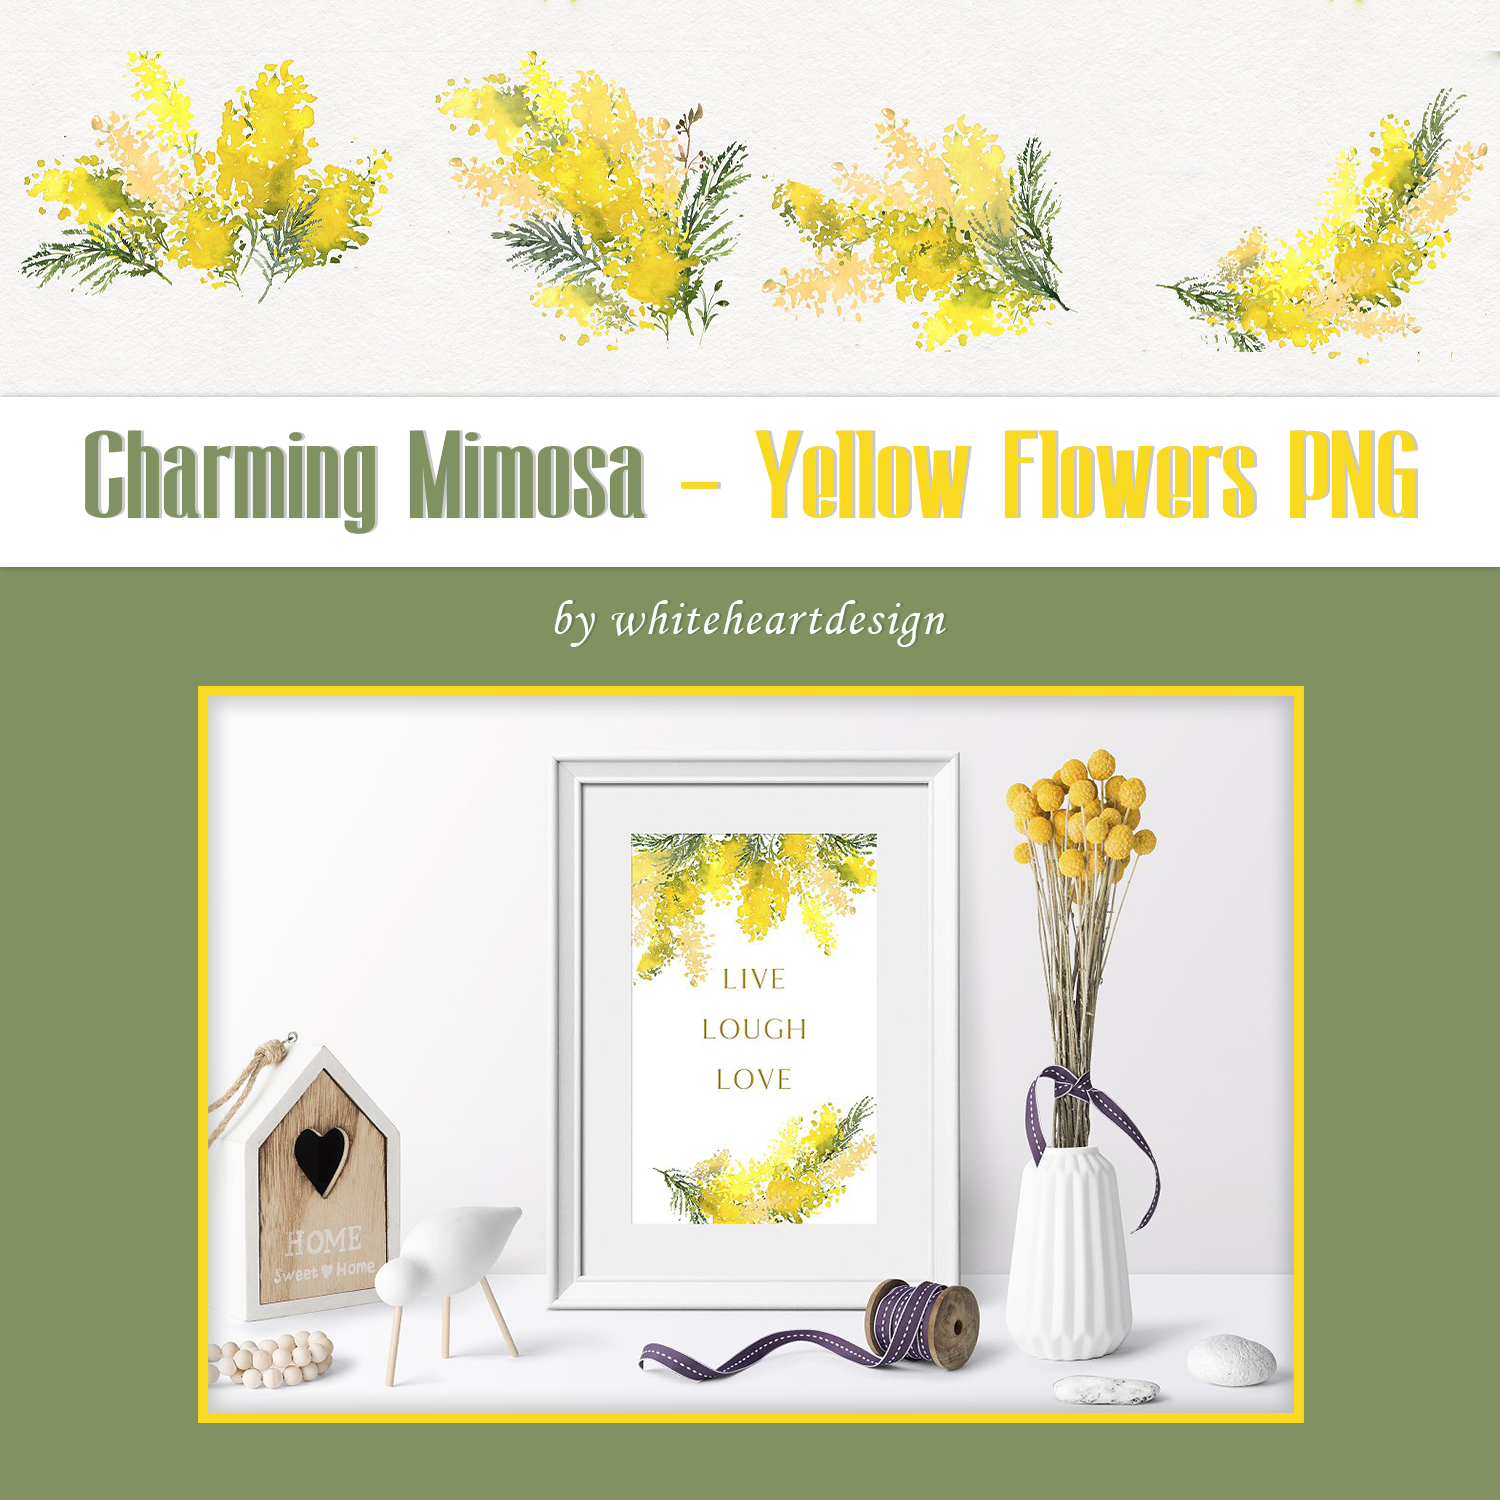 Charming mimosa yellow flowers preview.